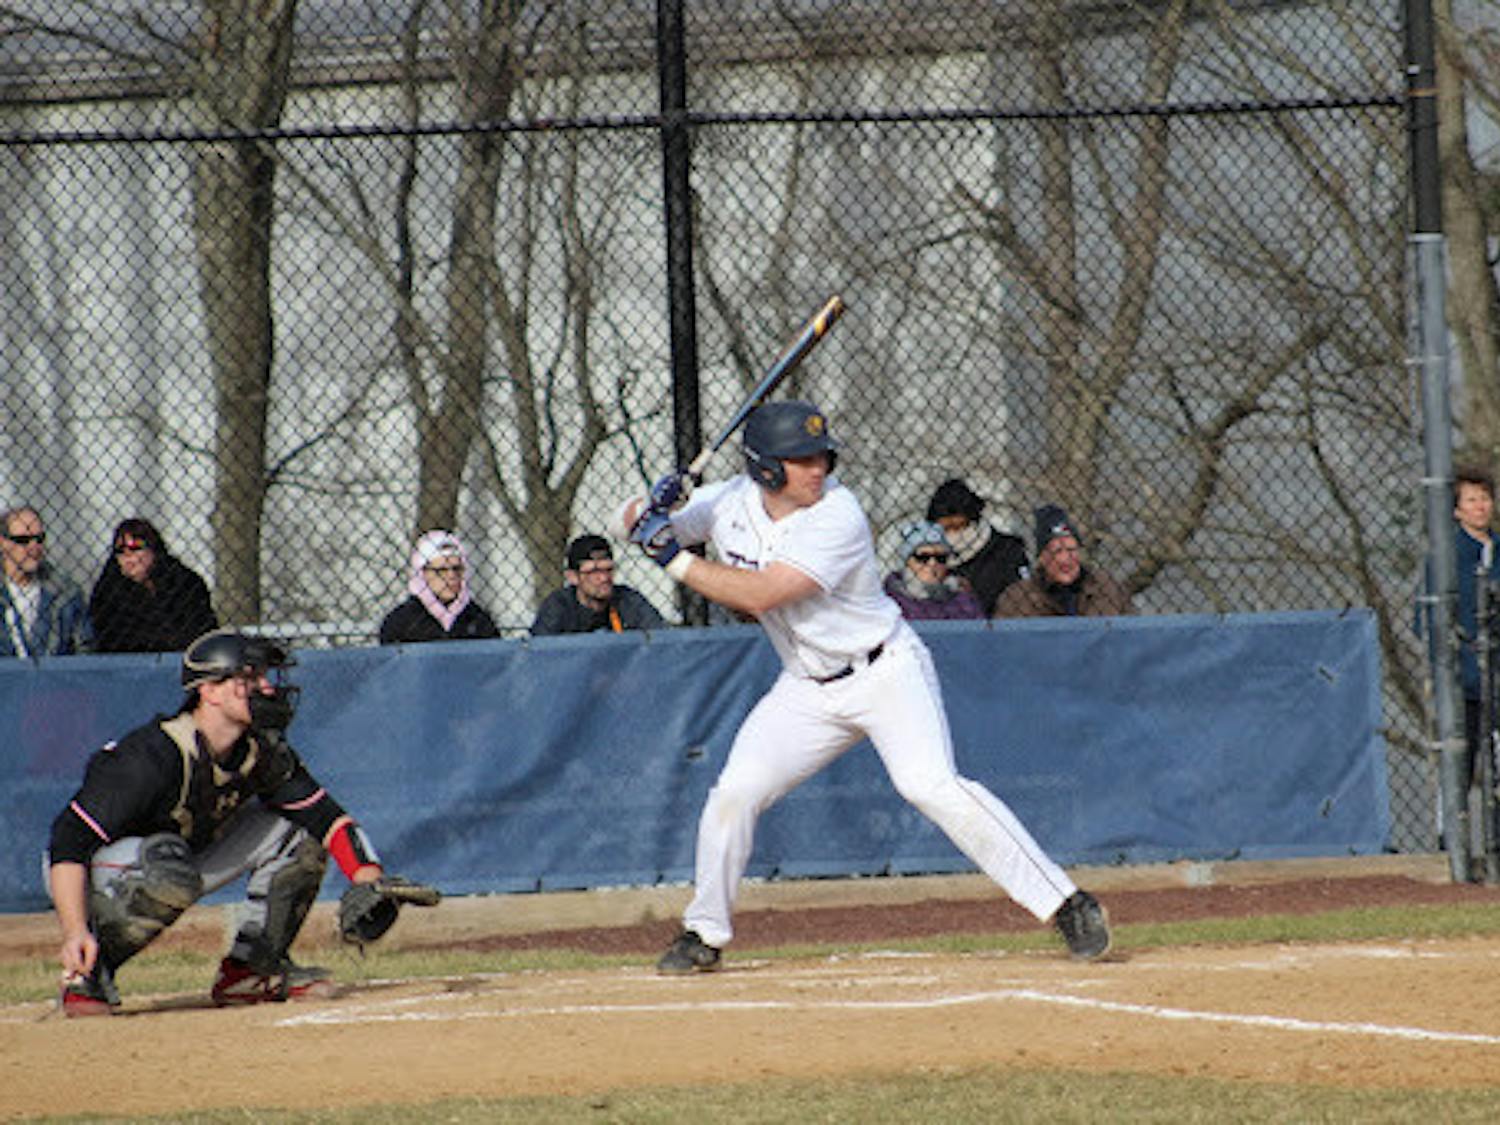 Photo from the game against Albright College on March 8 (Elizabeth Gladstone / The Signal).
